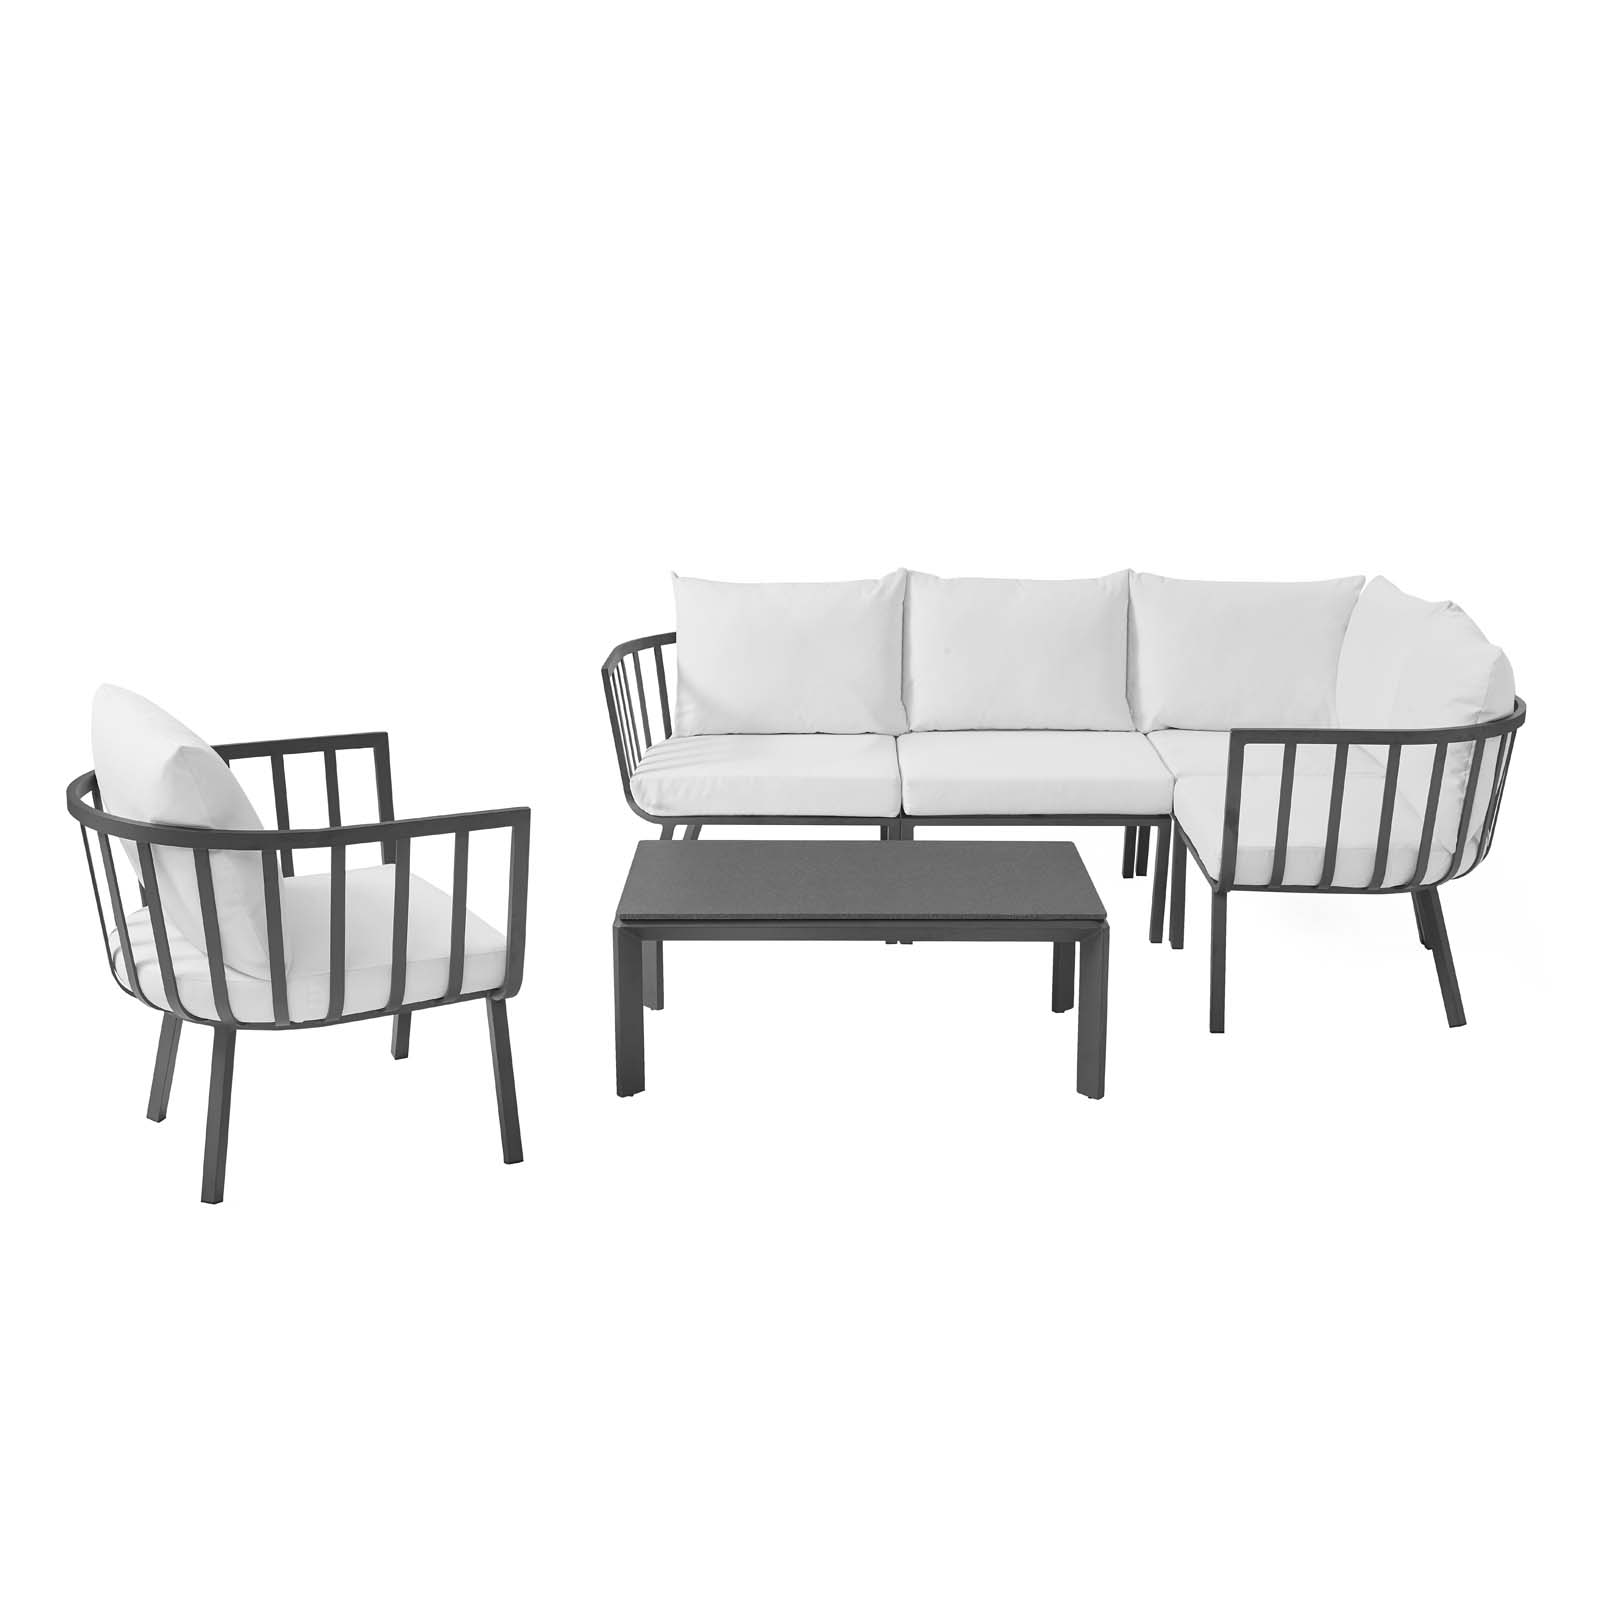 Lounge Sectional Sofa Chair Set, Aluminum, Metal, Steel, Grey Gray White, Modern Contemporary Urban Design, Outdoor Patio Balcony Cafe Bistro Garden Furniture Hotel Hospitality - image 1 of 10